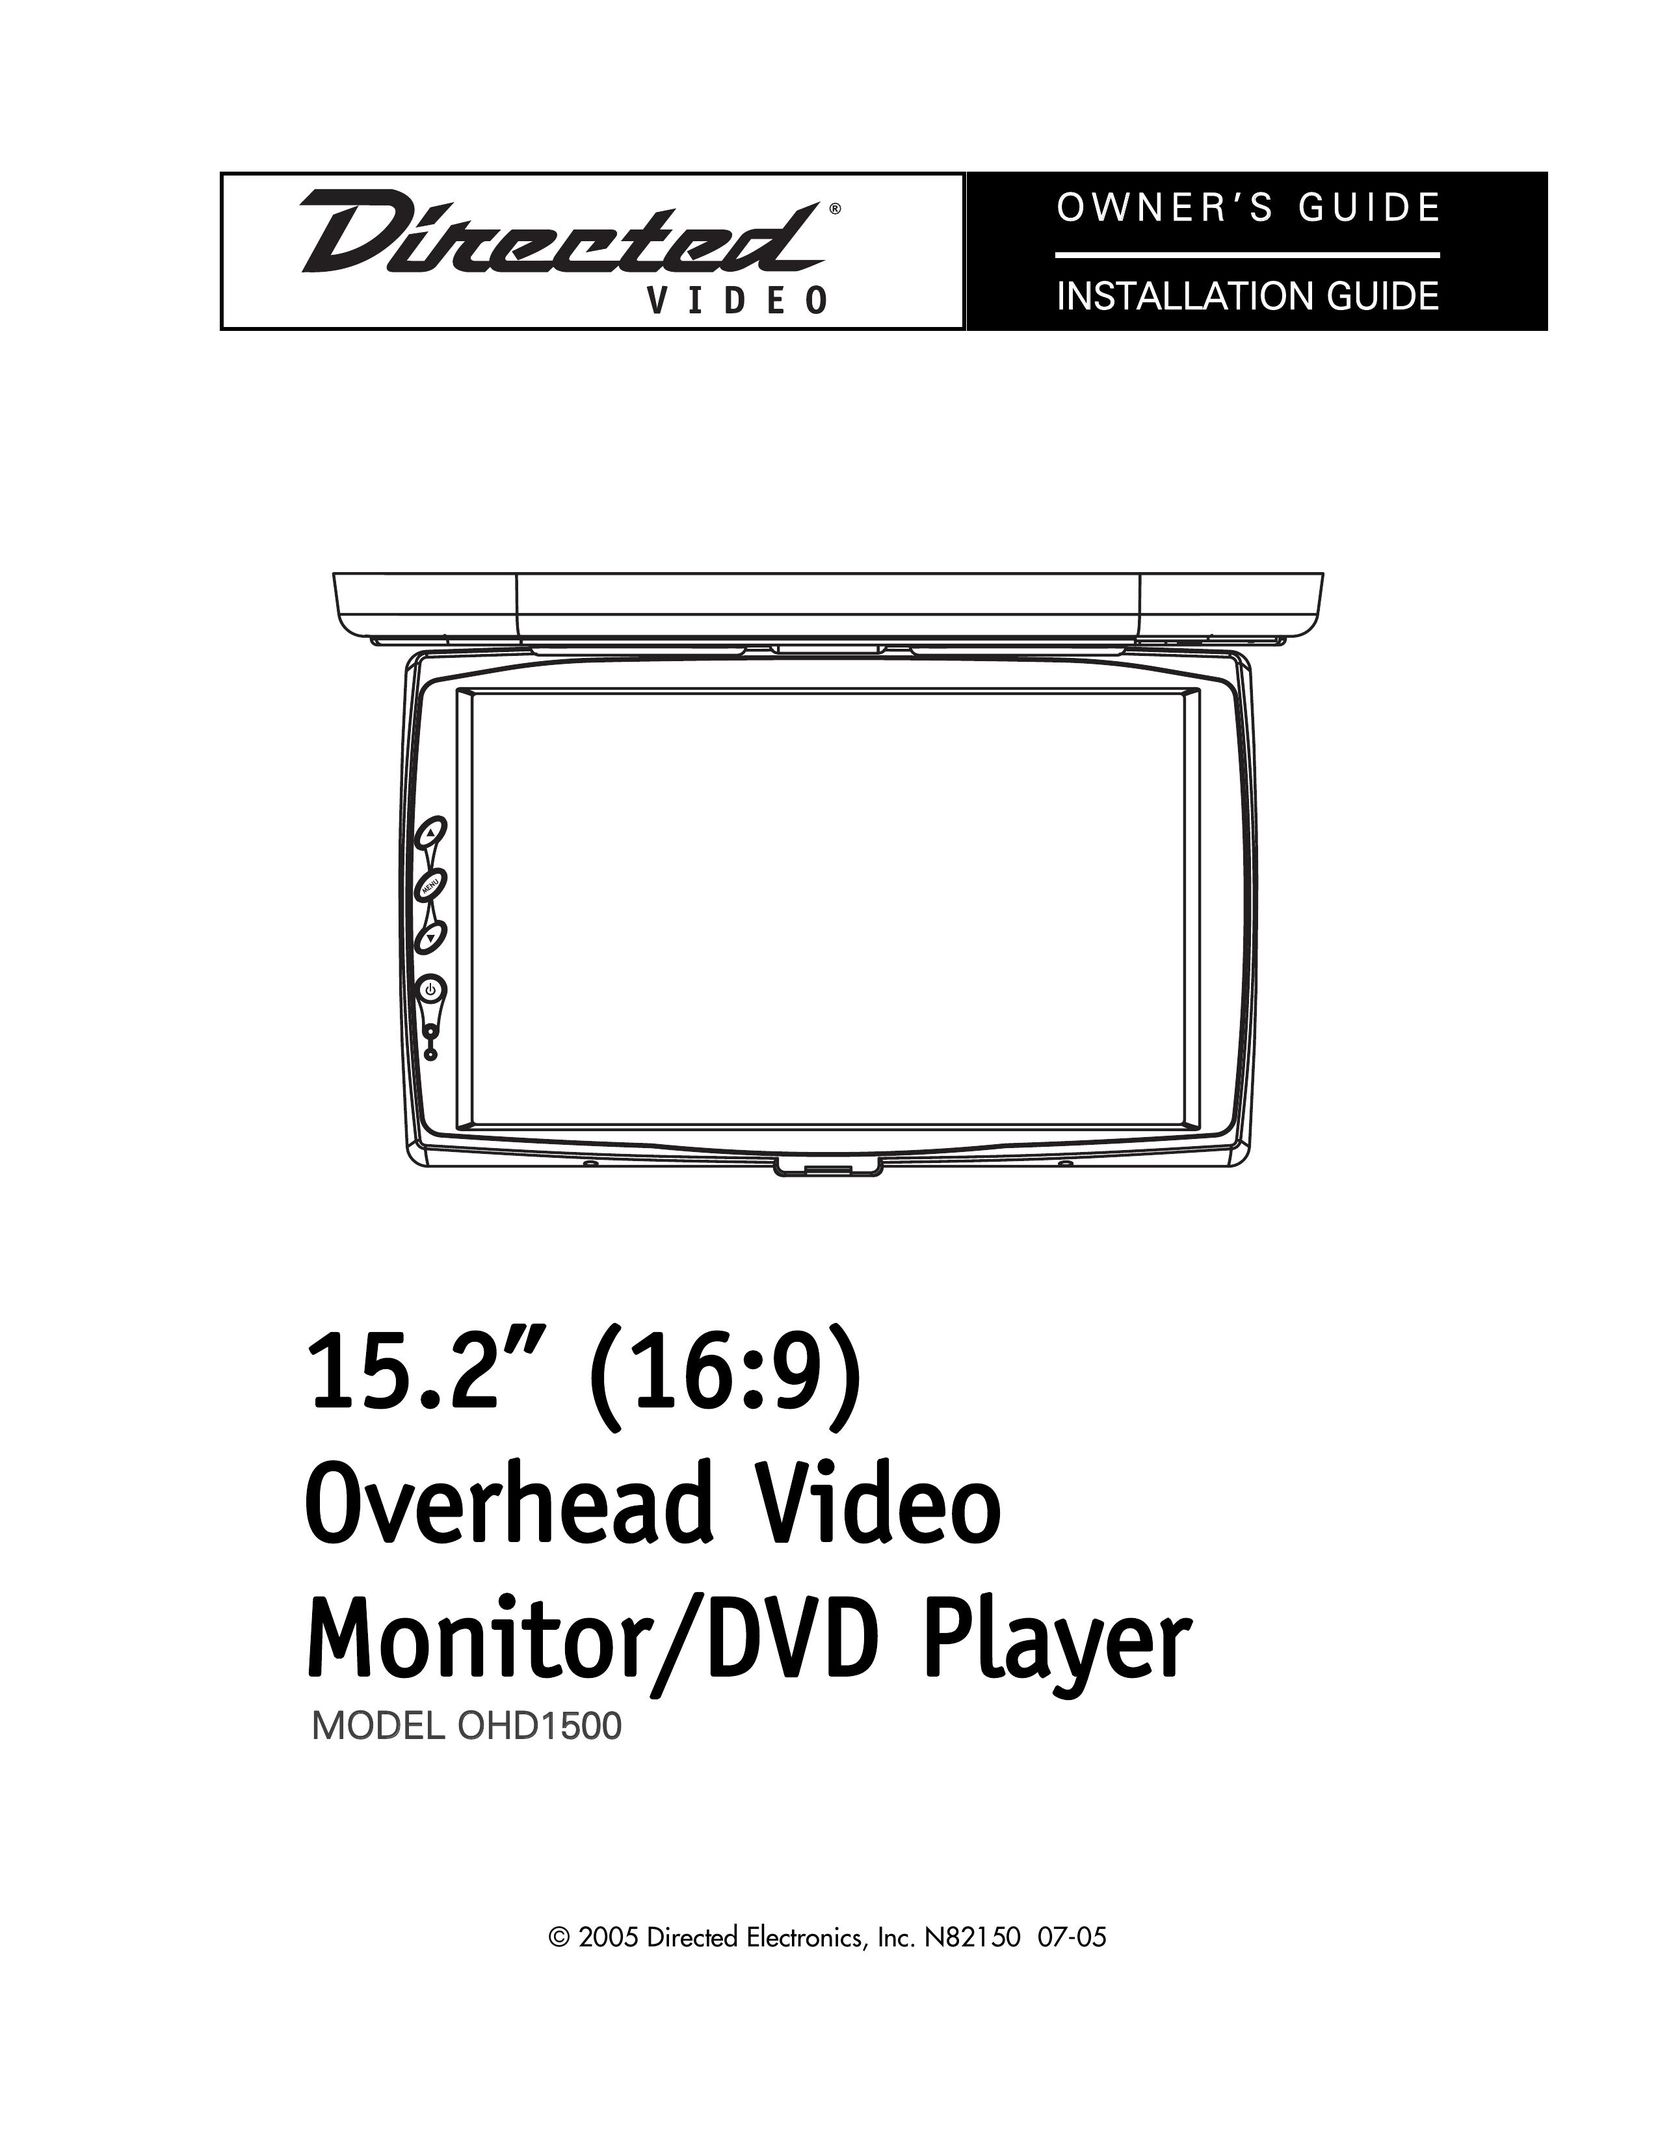 Directed Video OHD1500 TV DVD Combo User Manual